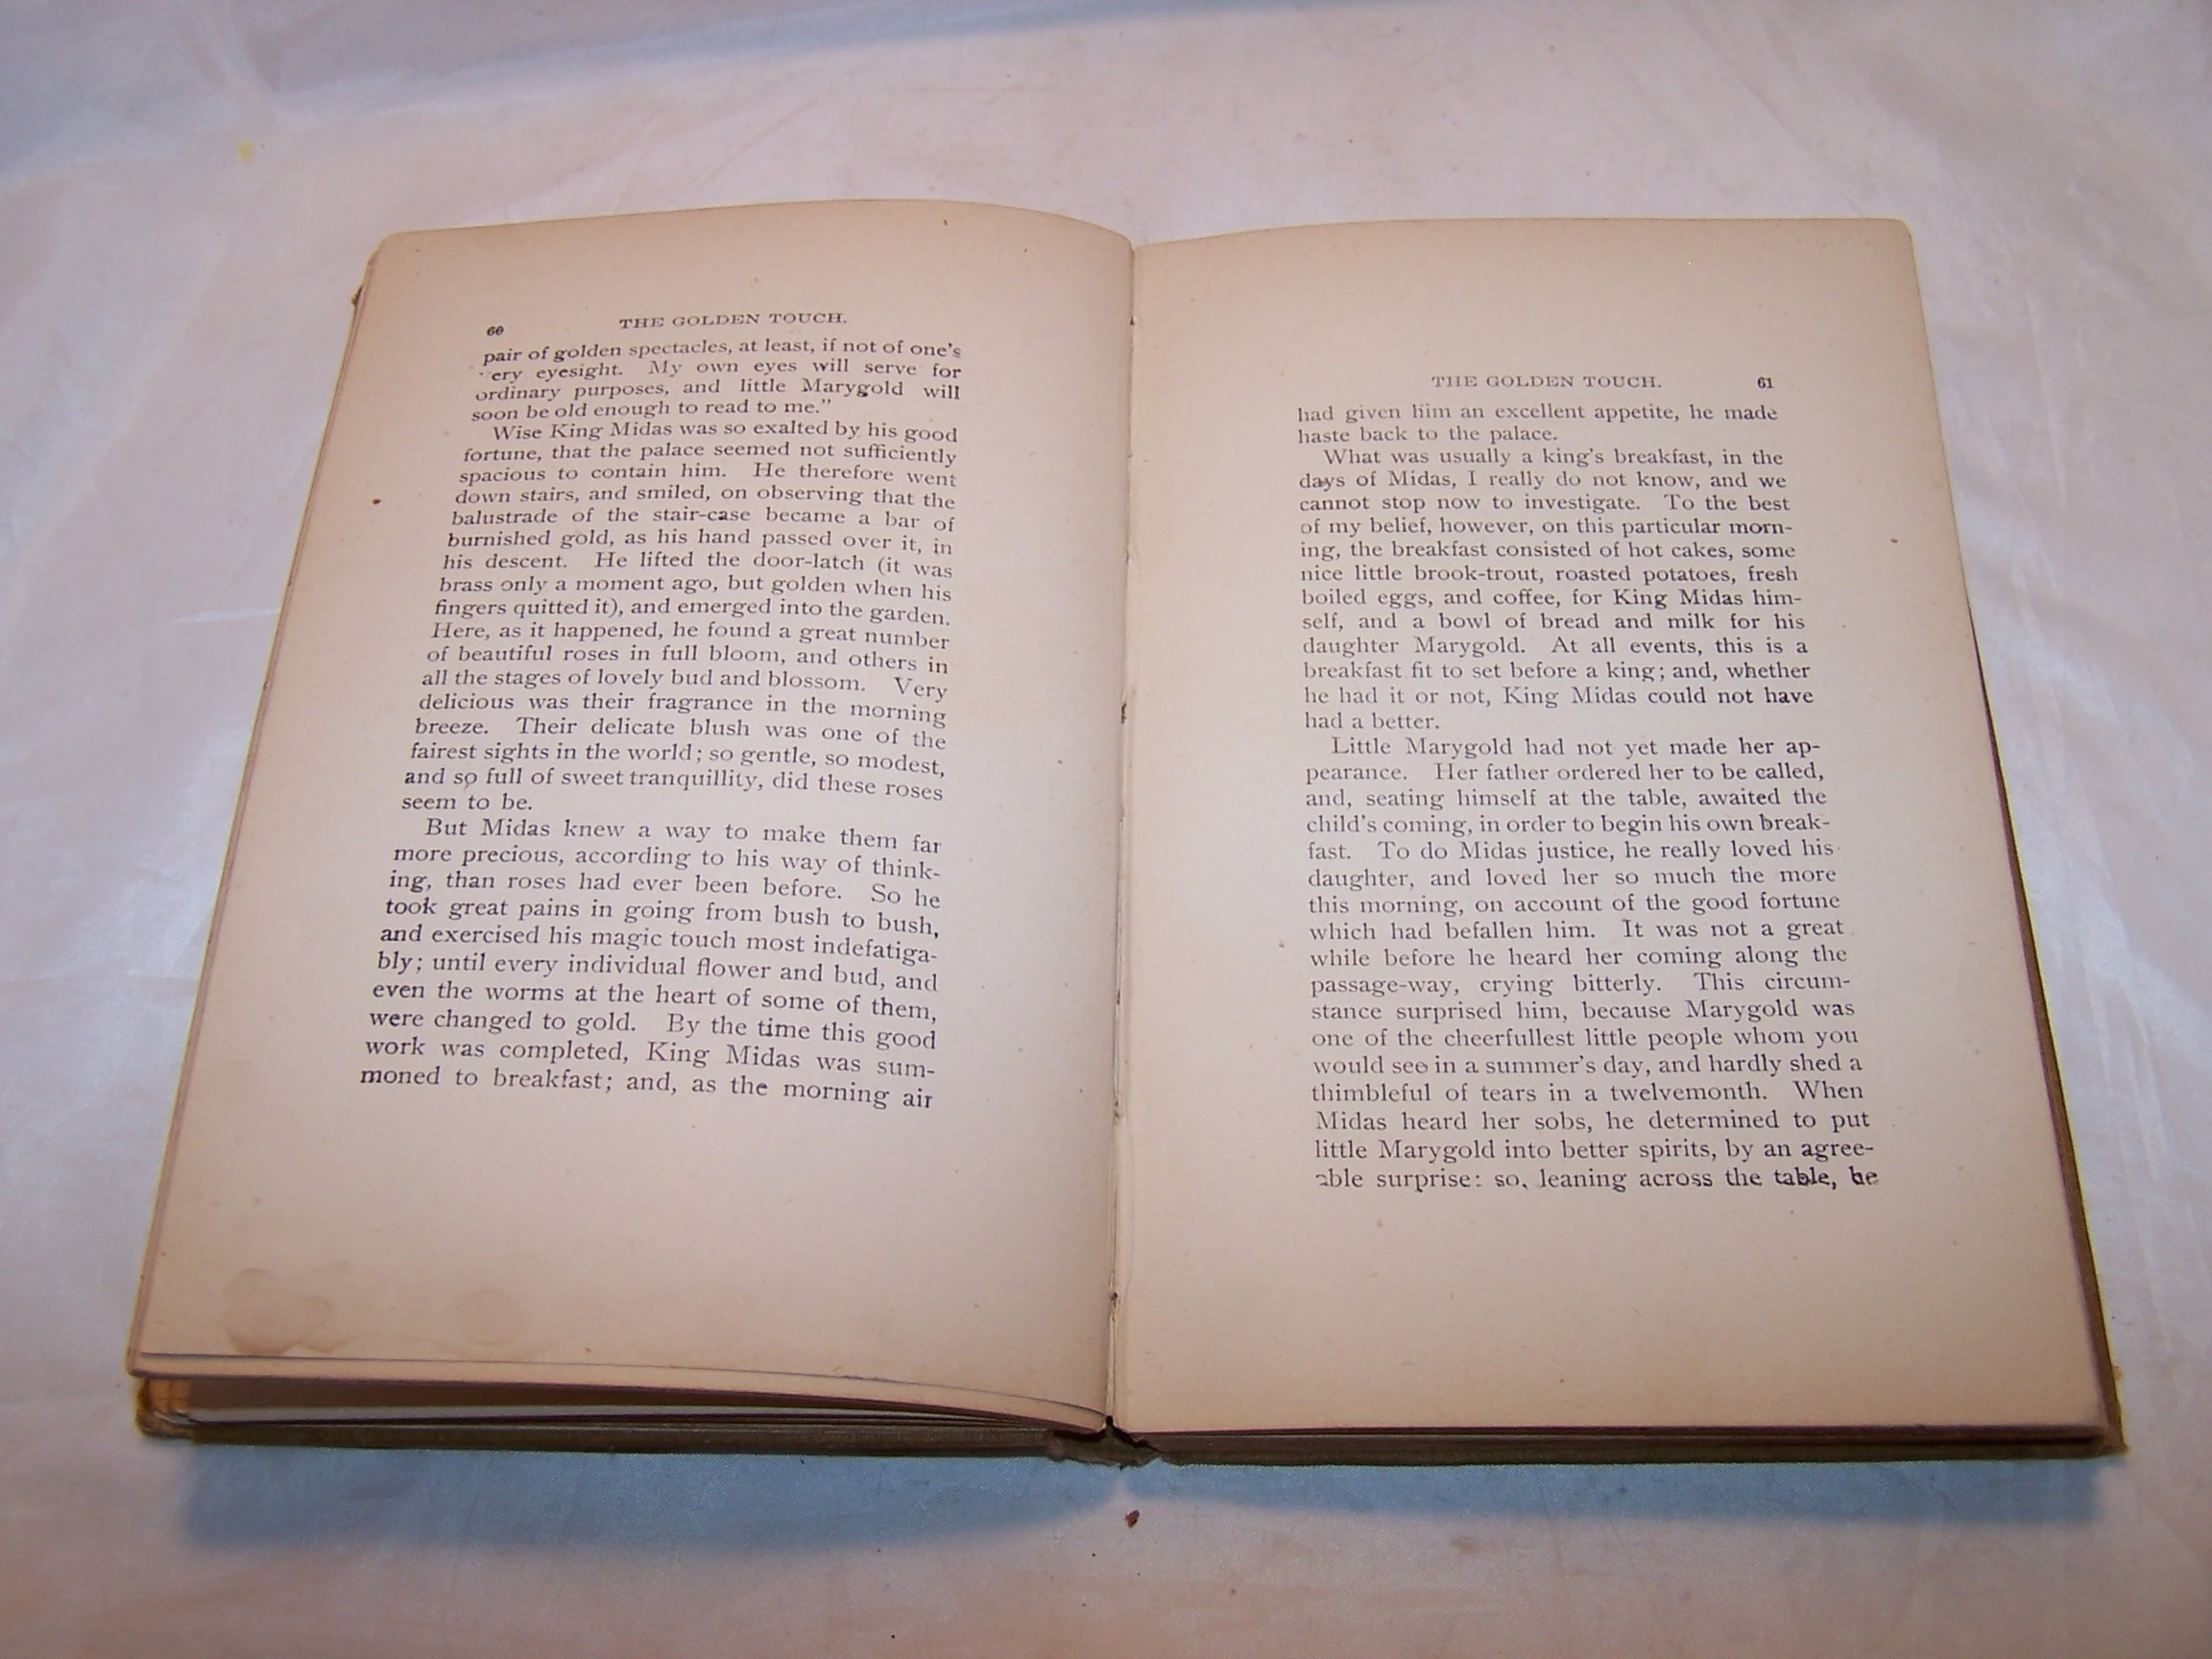 Image 3 of Wonder Book for Boys and Girls, Hawthorne, First Edition, Donohue and Co.